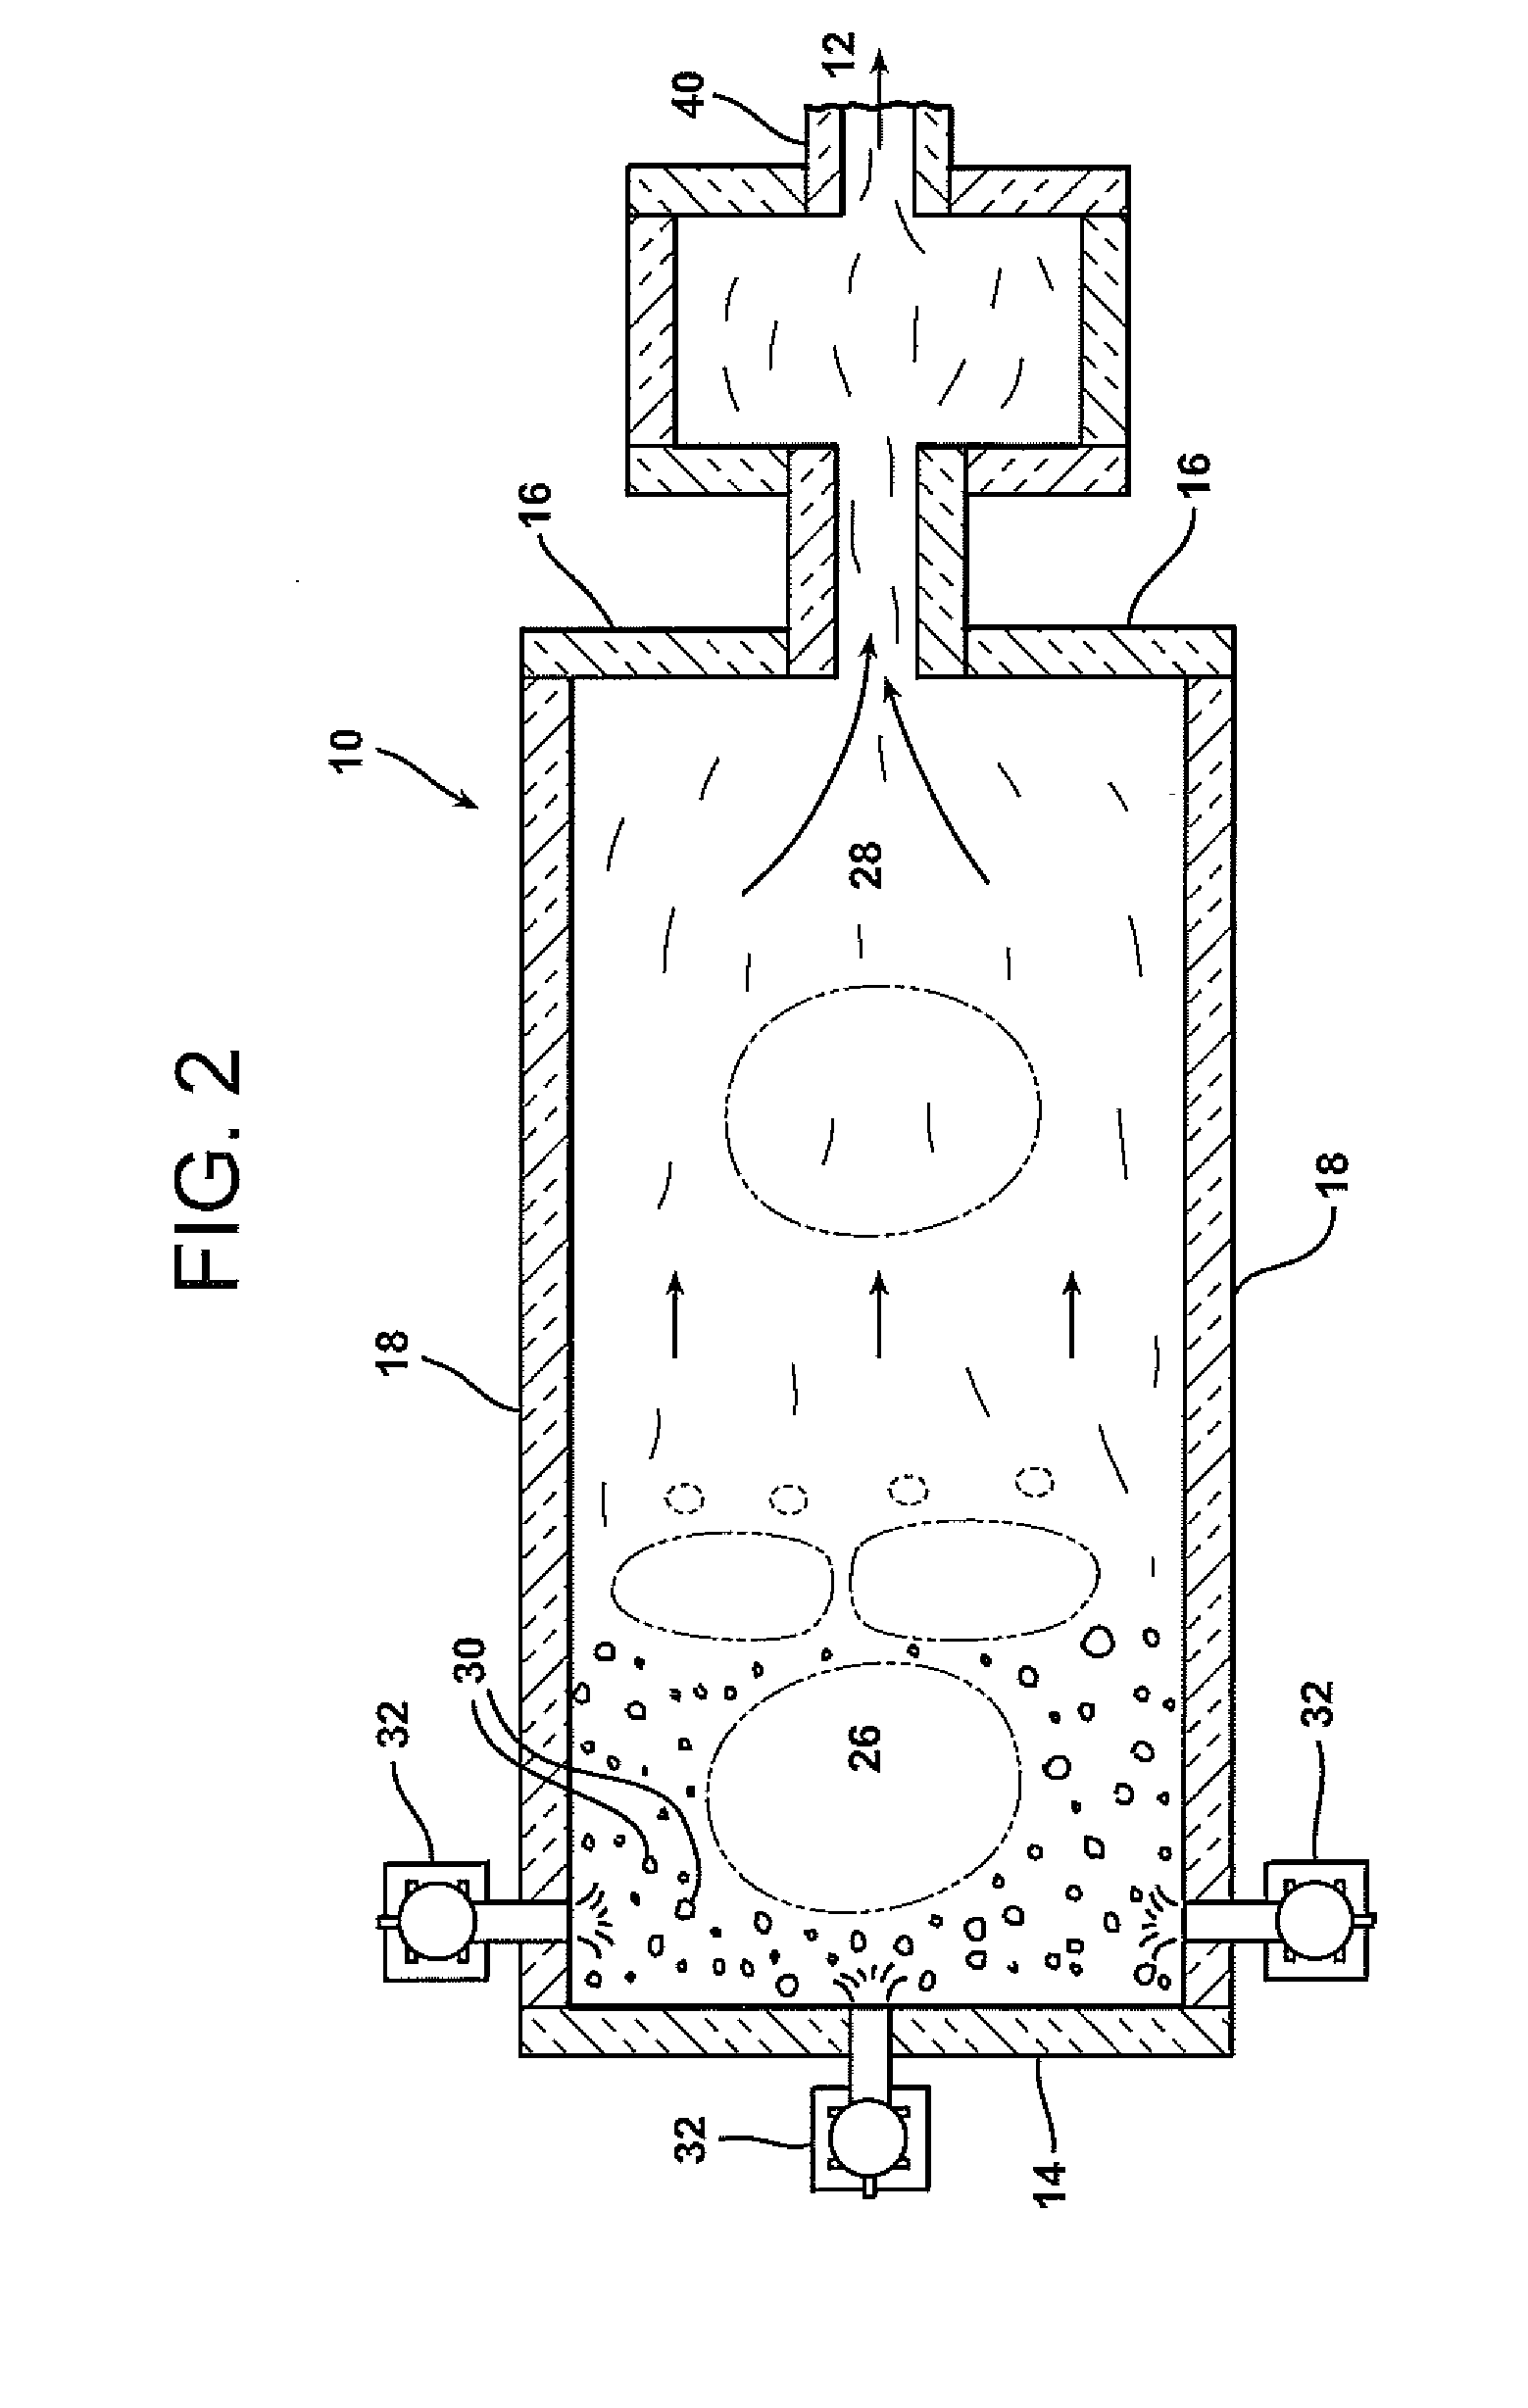 Method Of Manufacturing S-Glass Fibers In A Direct Melt Operation And Products Formed There From